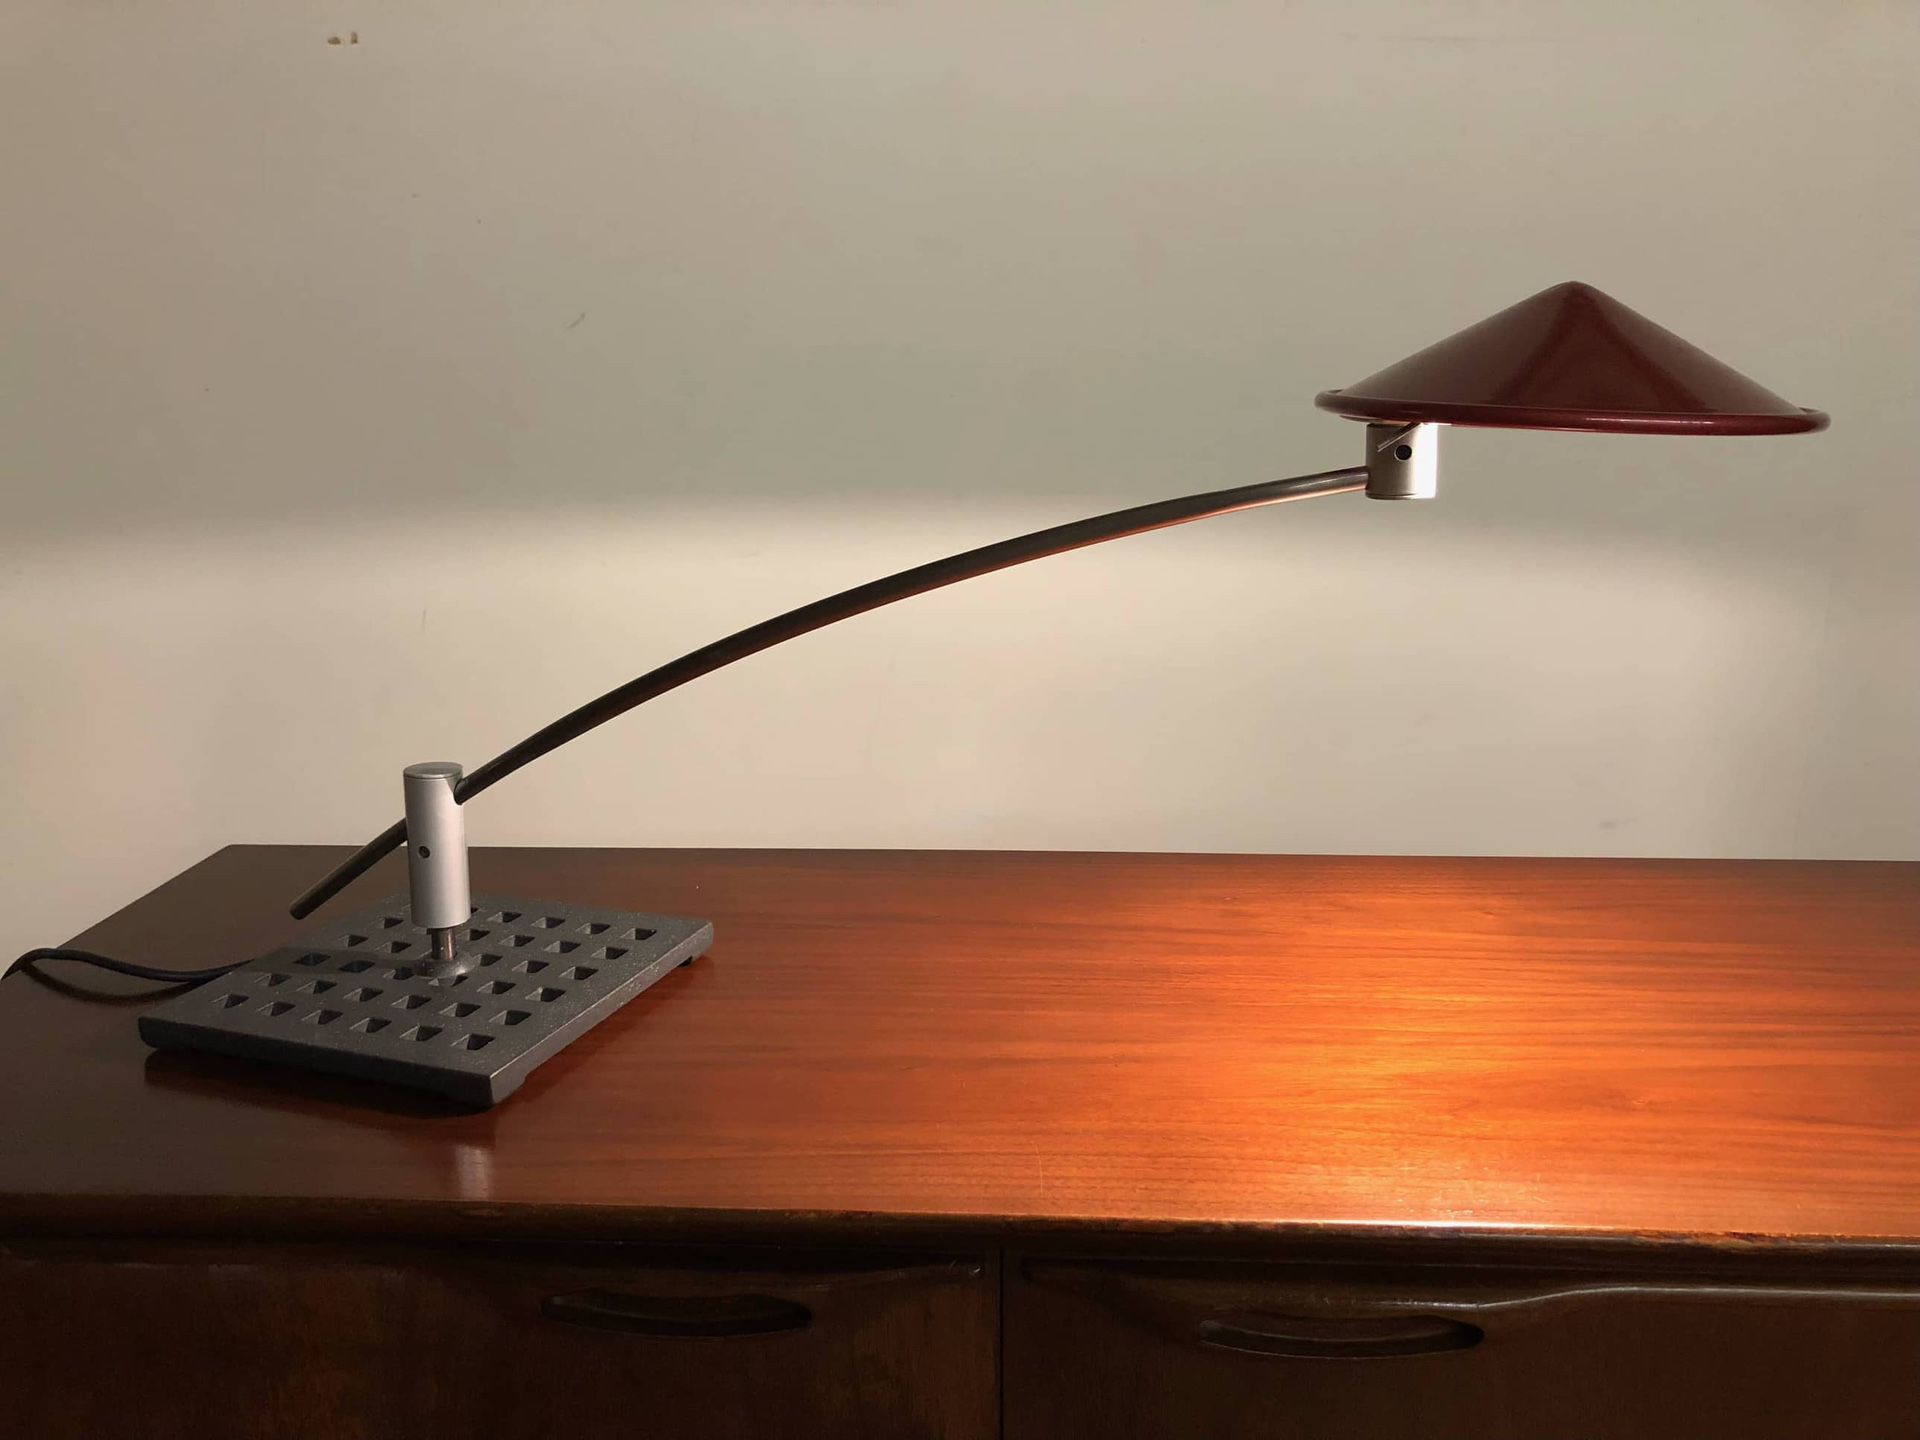 Arteluce “China” Vintage Italian Pivoting Arm Lamp - Many More Items In Stock!